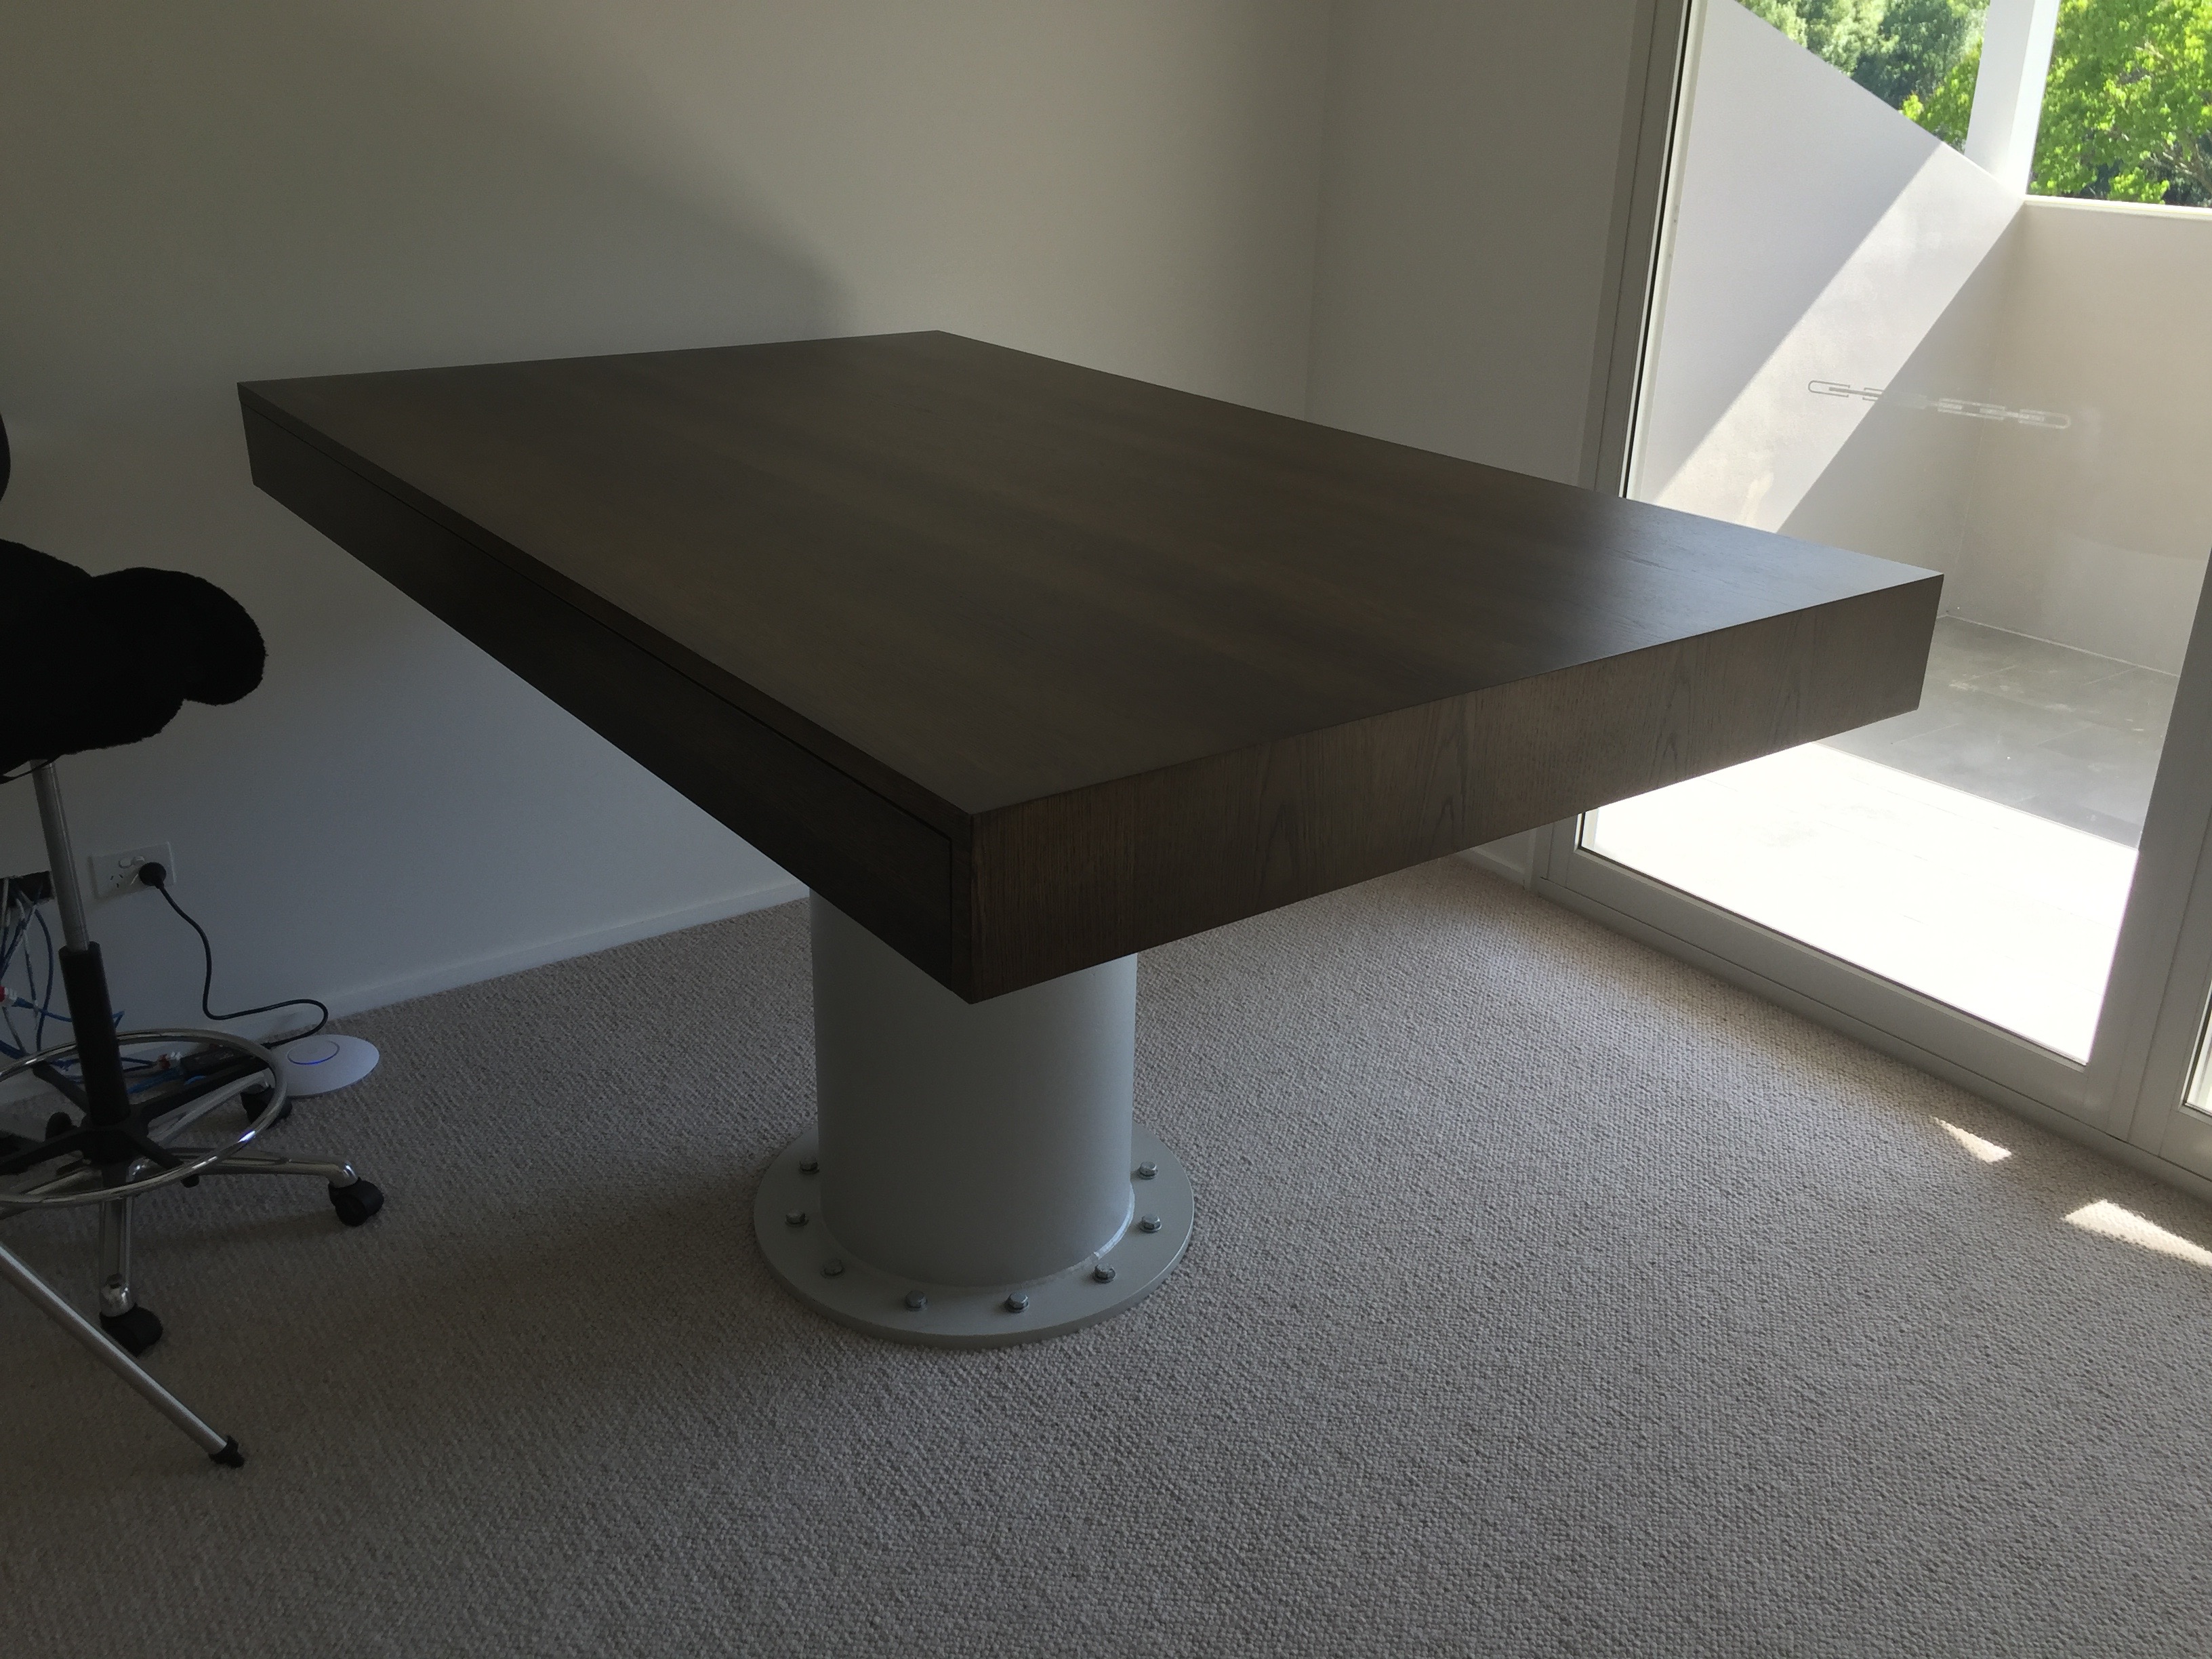 Motorised Height Adjustable Table Designed and Built by Sound with Vision